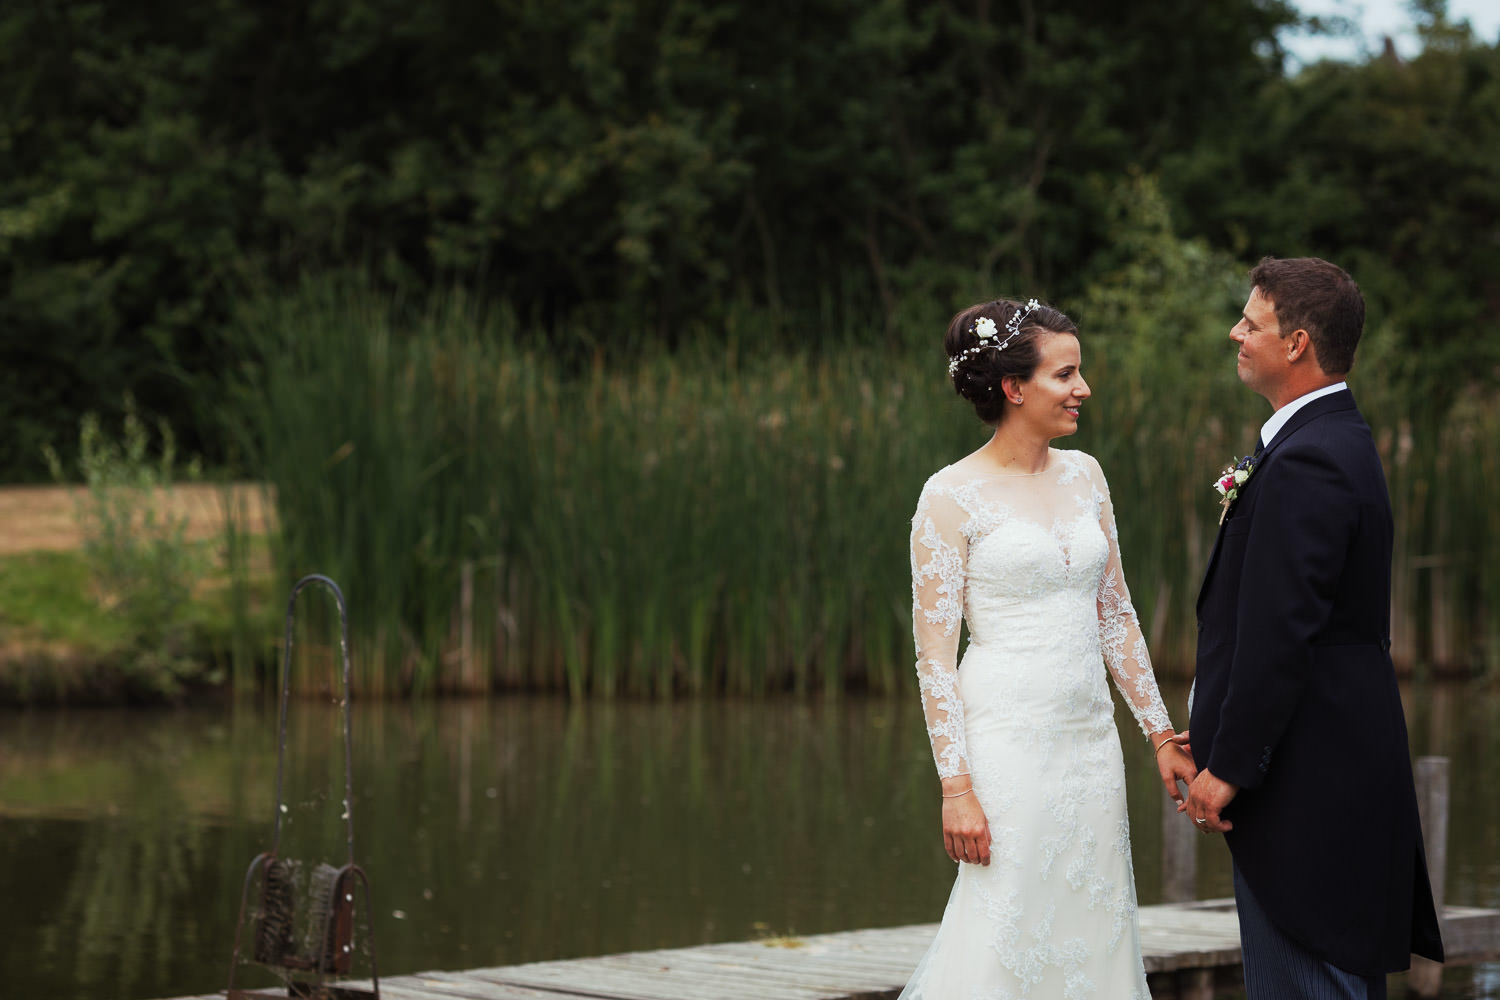 Bride and groom by a pond.